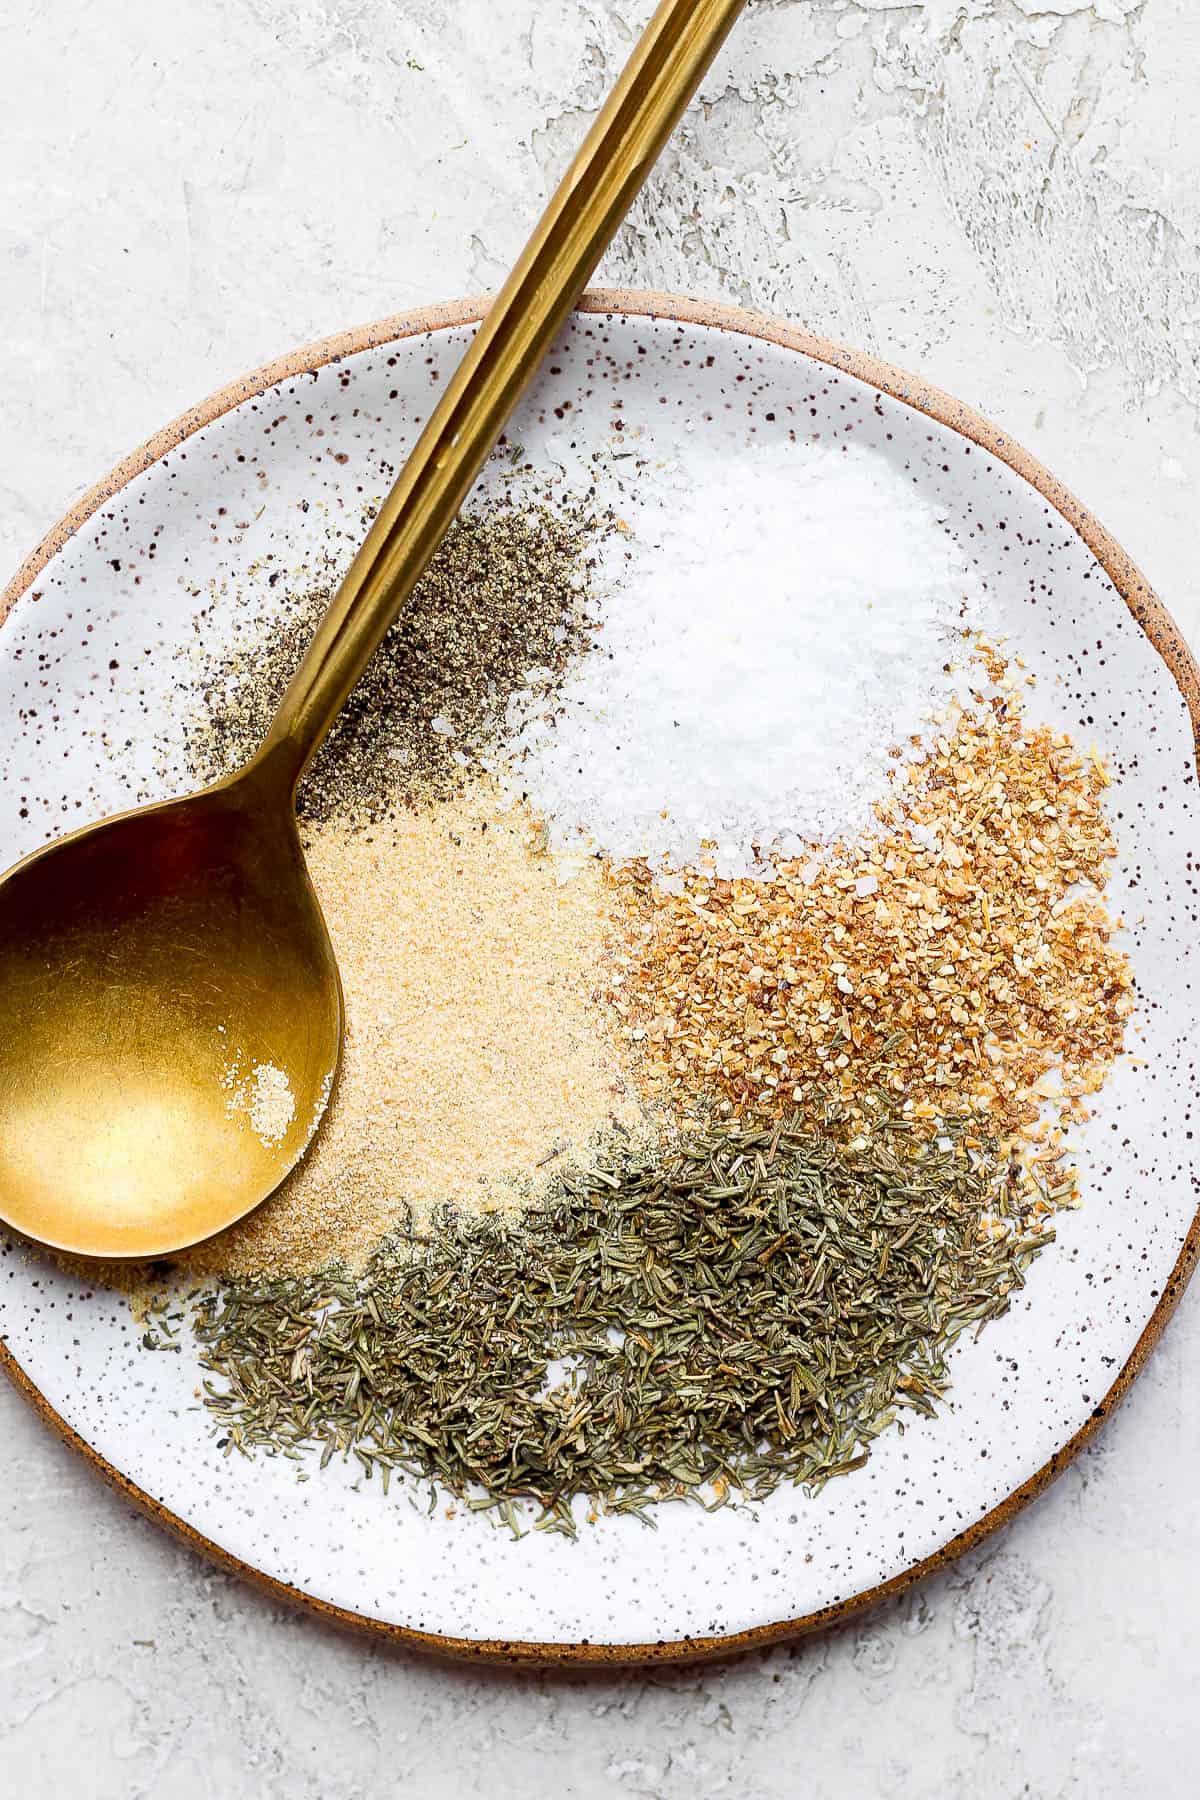 Seasoning ingredients on a plate with a spoon before mixing.